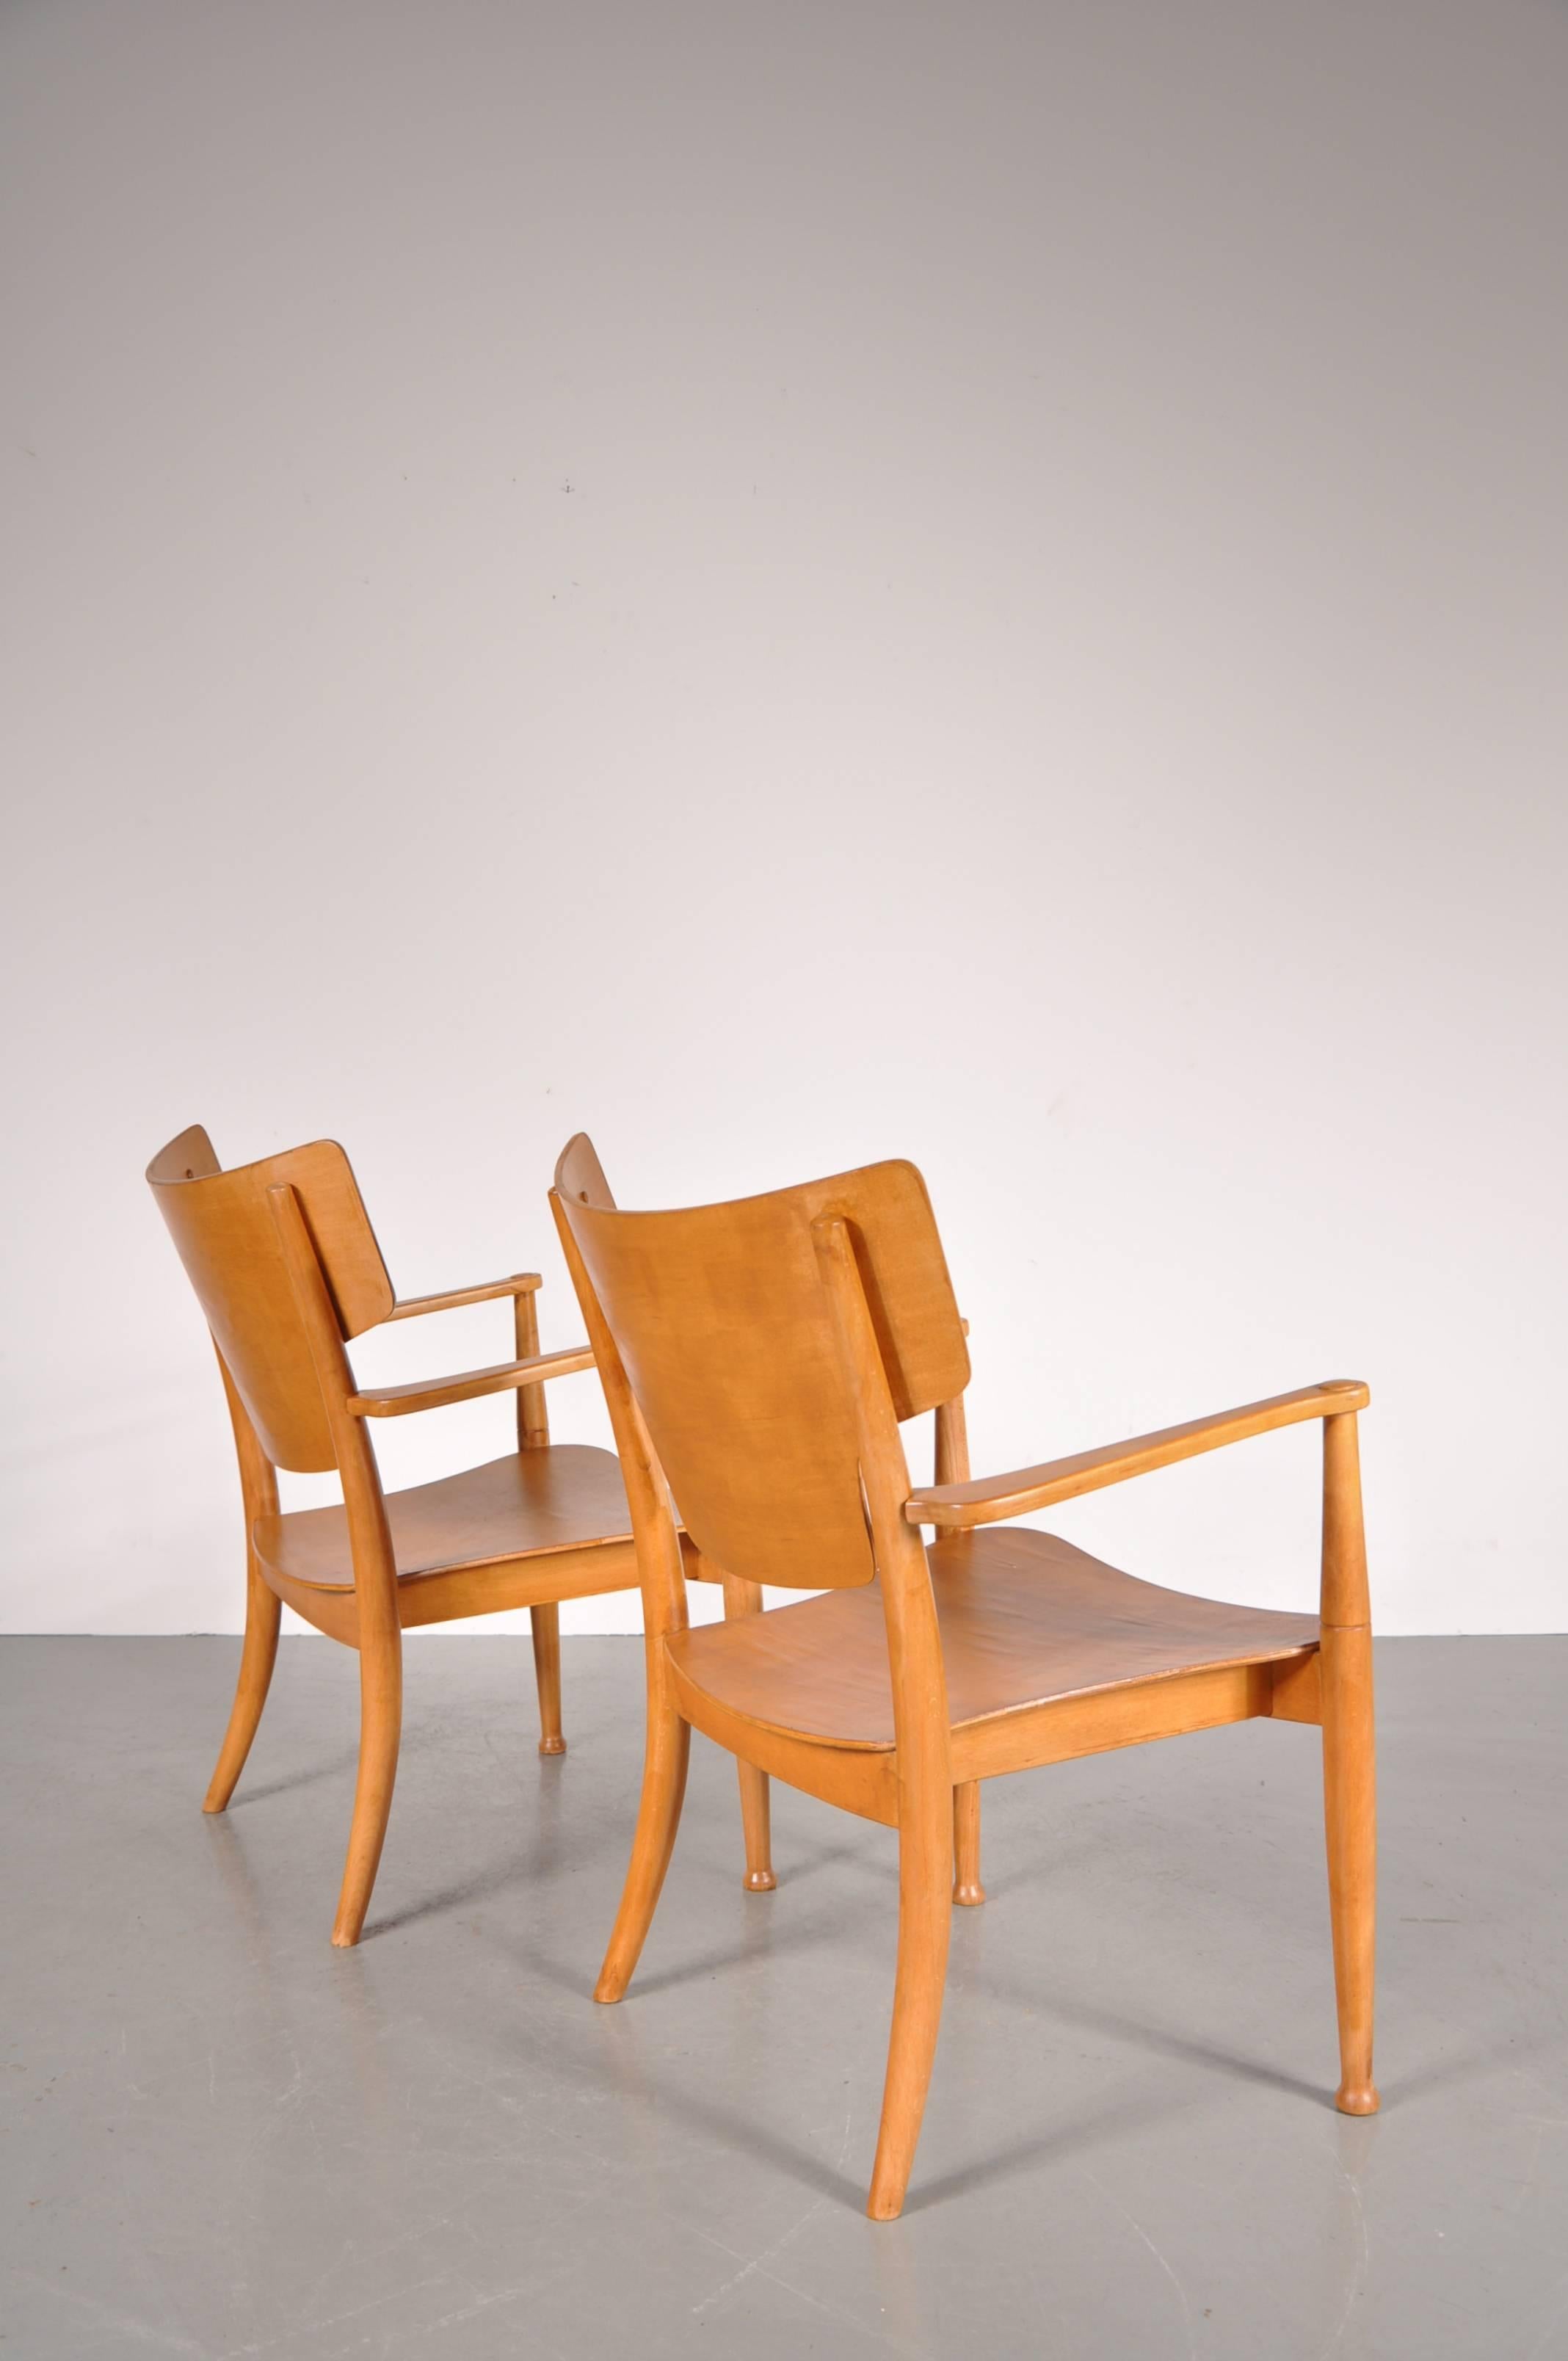 Beautiful pair of Portex easy chairs by Peter Hvidt and Orla Molgaard-Nielsen, manufactured in Denmark around 1940.

They are completely made of high quality beech, crafted with a nice eye for detail.

In good original condition with minor wear